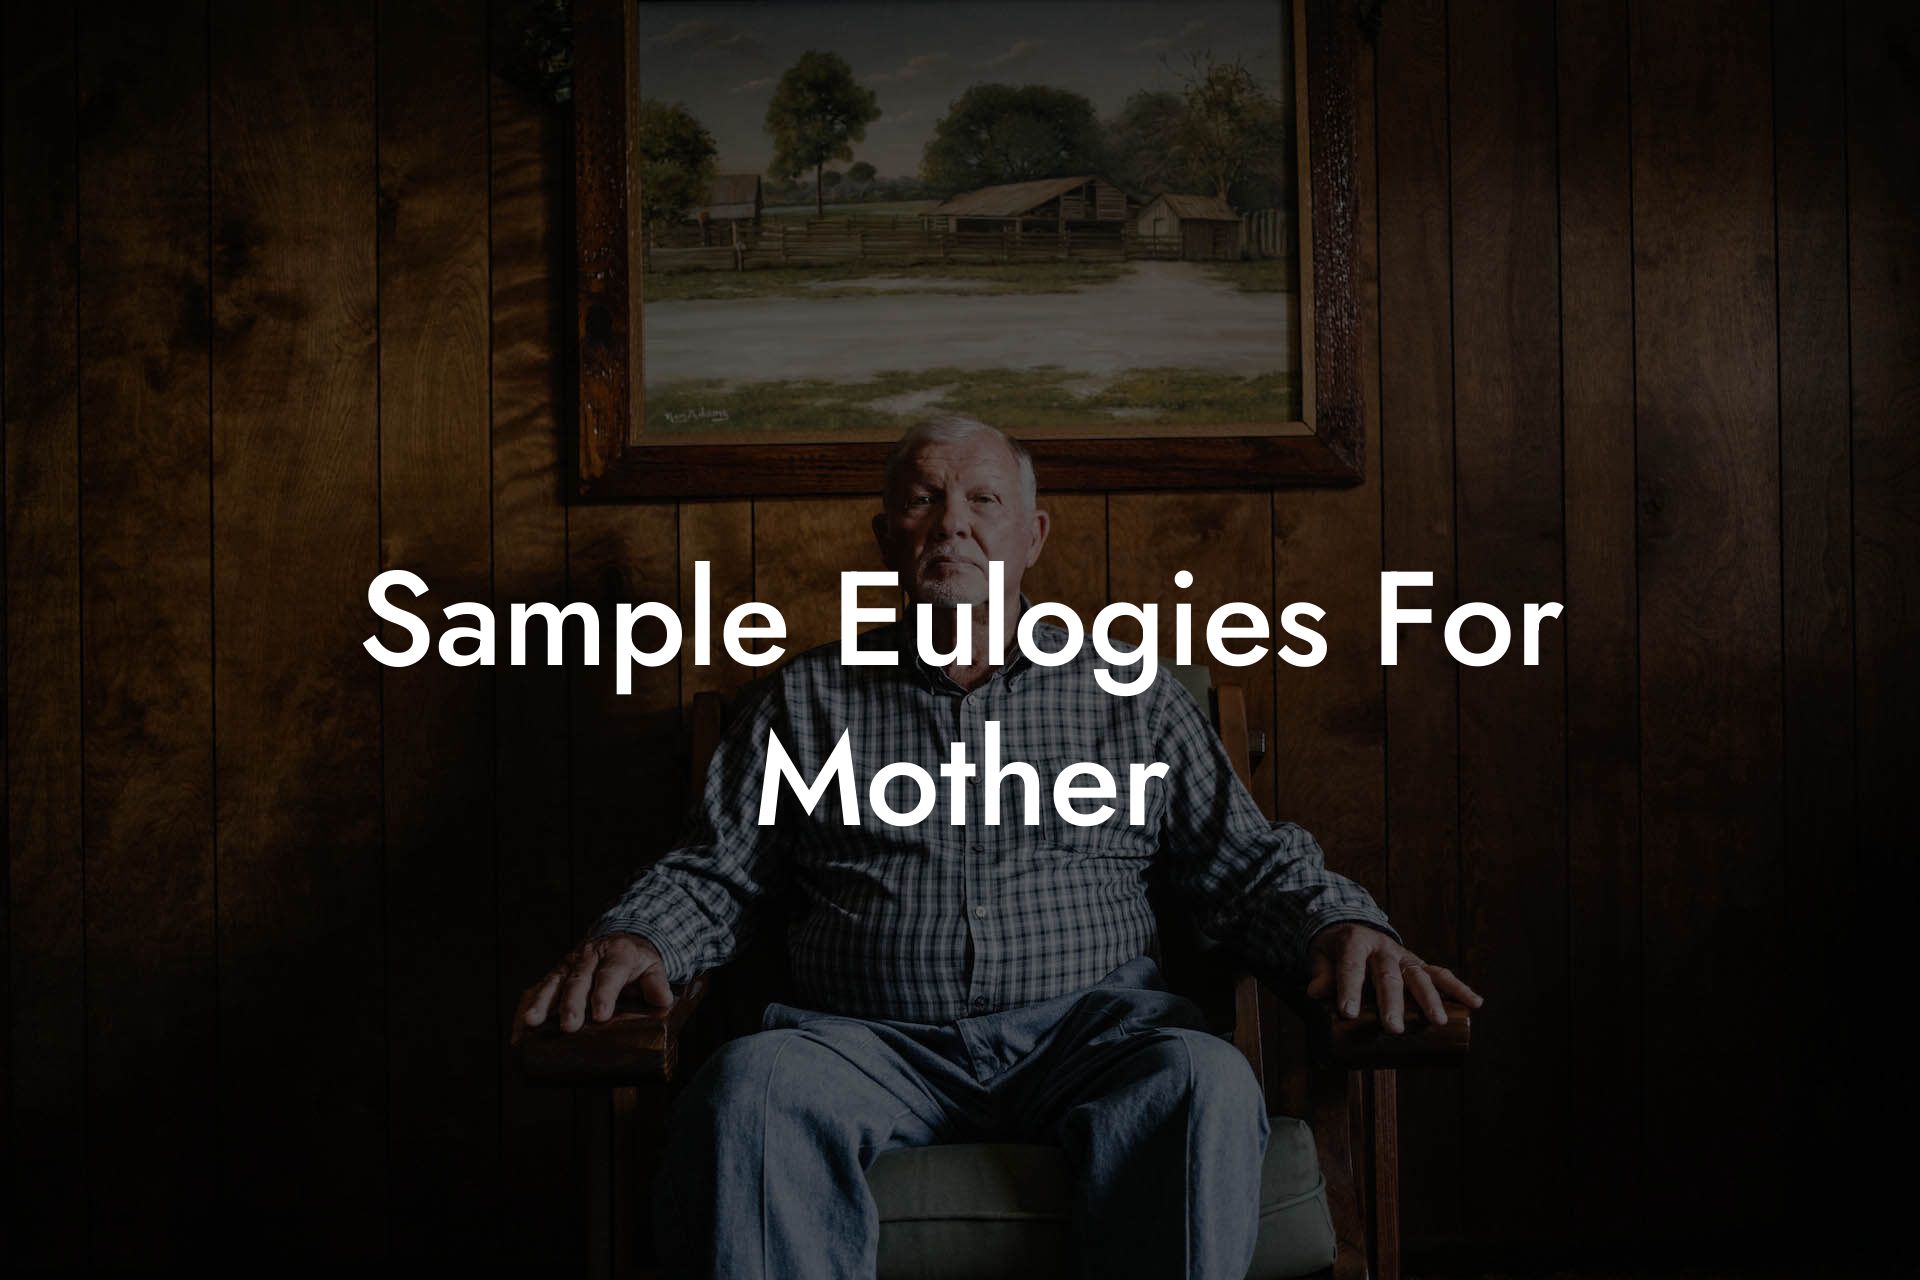 Sample Eulogies For Mother